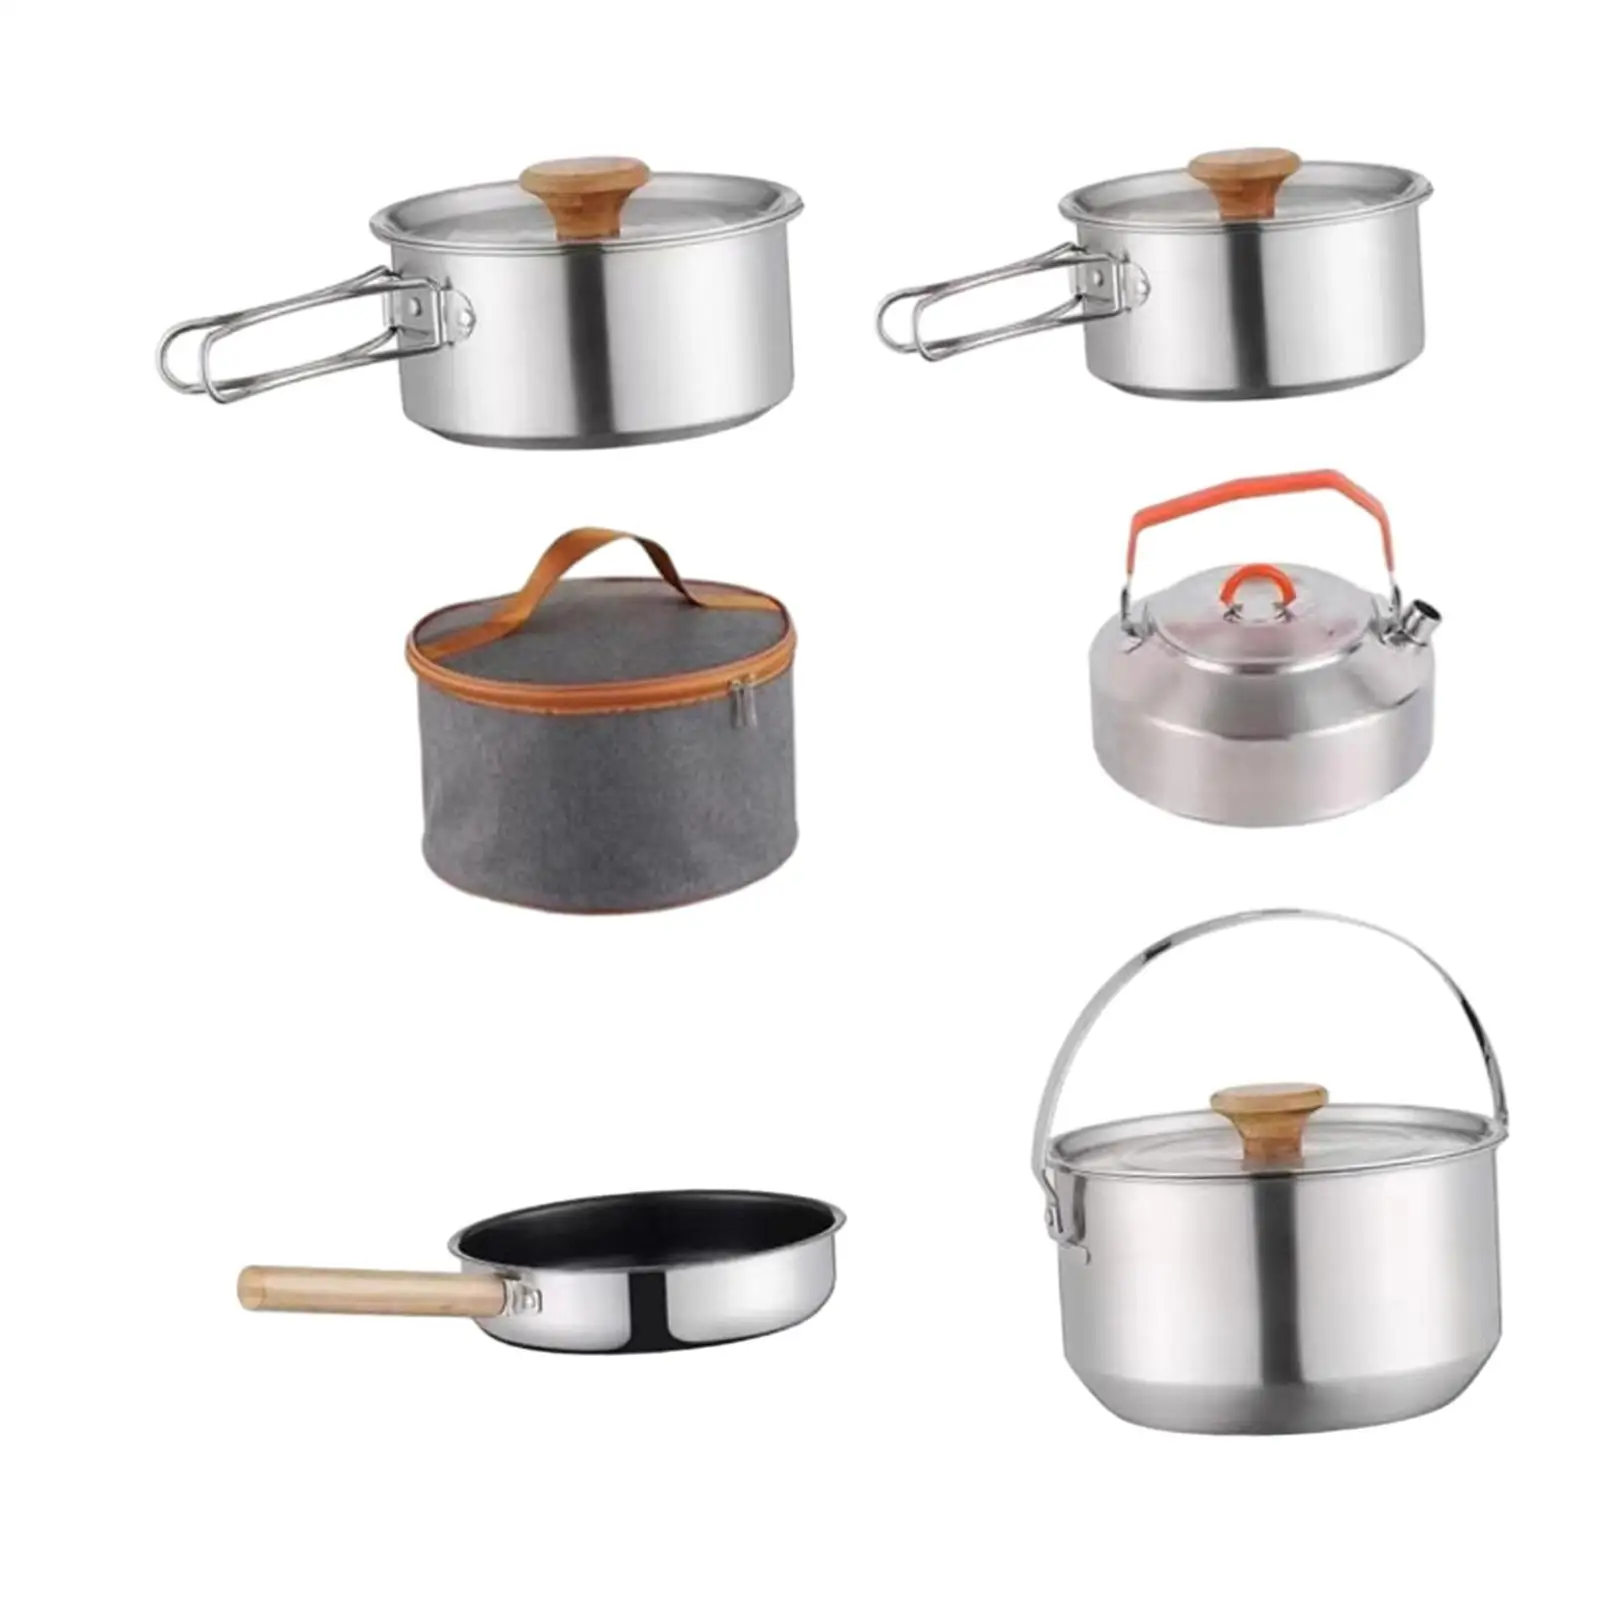 Camping Cookware Kit Outdoor Pot with Storage Bag Portable Nonstick Cookset Cooking Set for Indoors Picnic Campfire Fishing